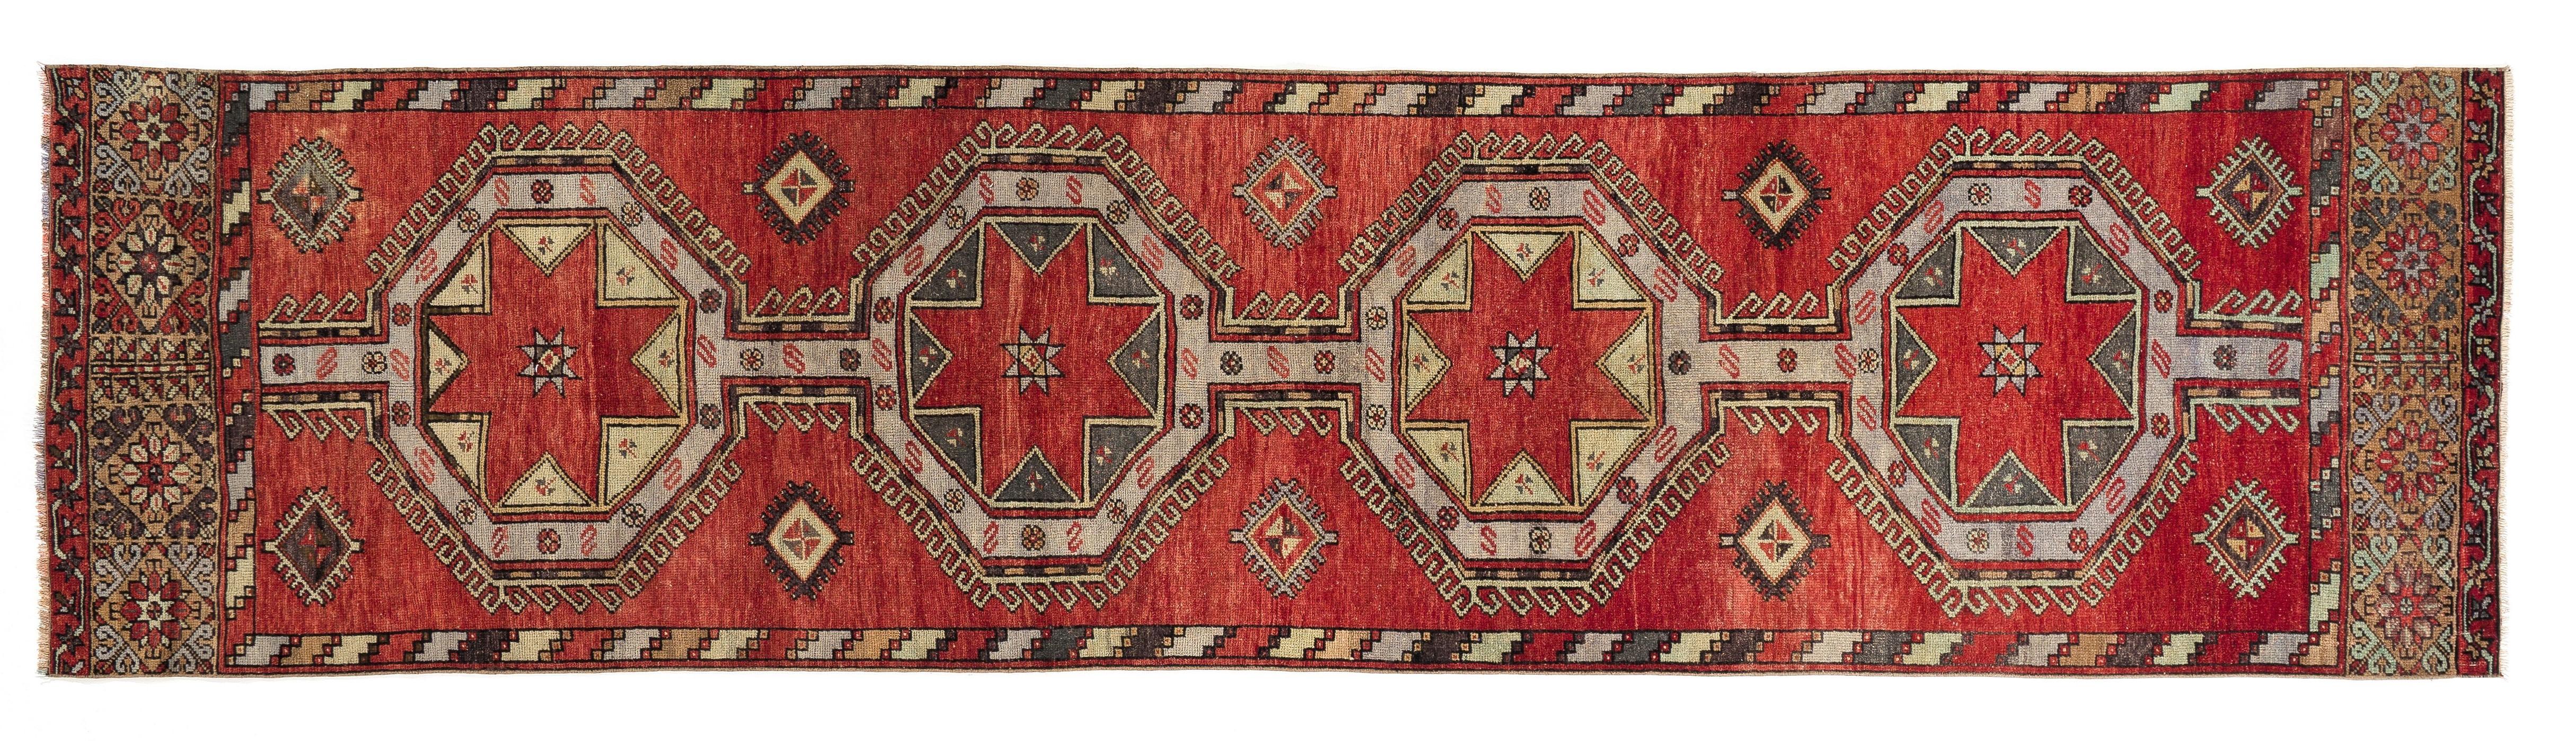 Wool 3.3x13 Ft Hand-Knotted Vintage Turkish Oushak Runner Rug in Red with Medallions For Sale